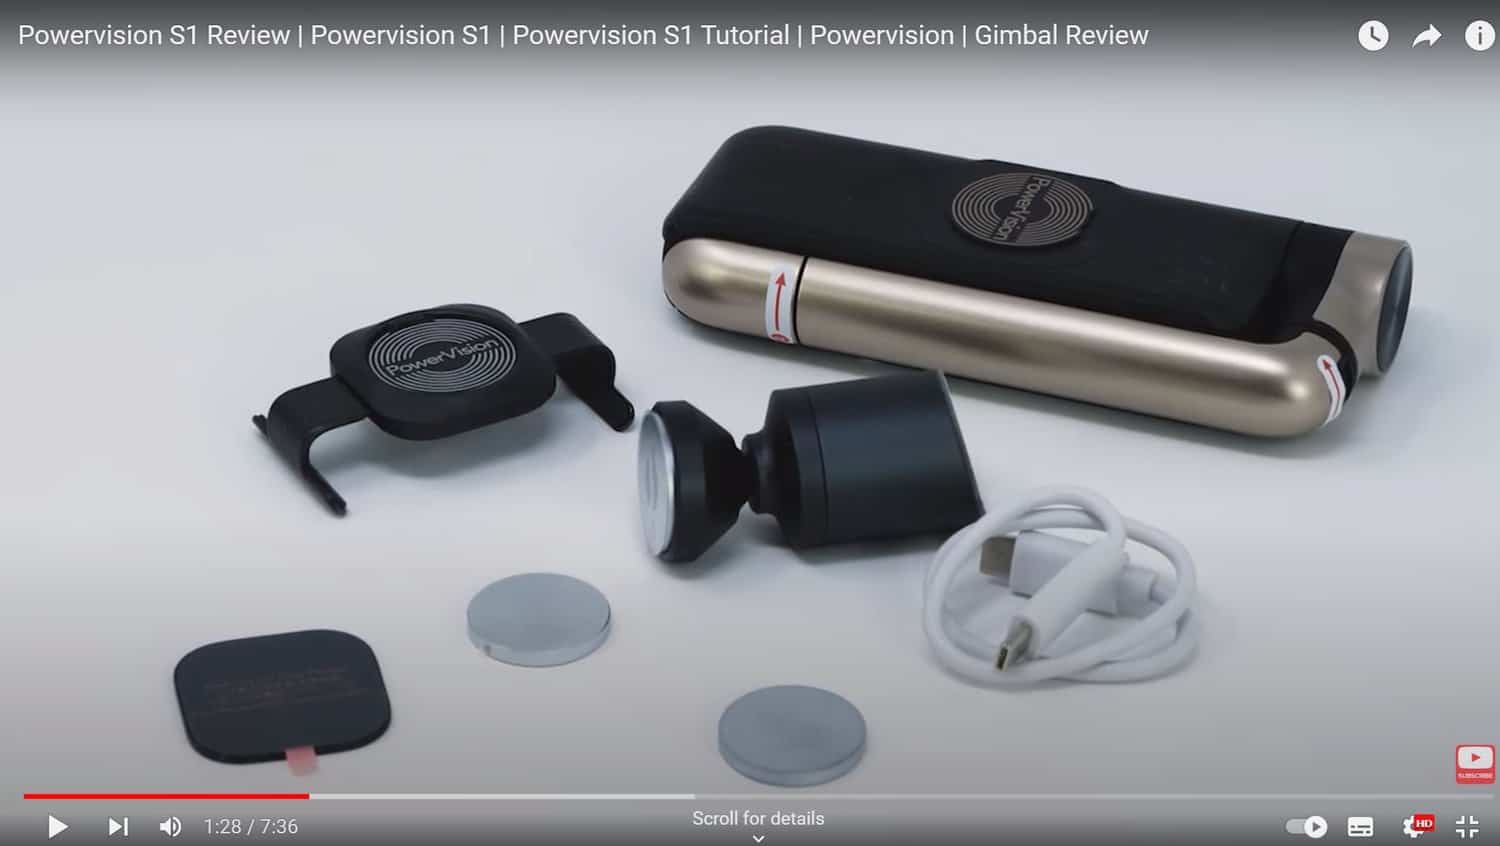 unboxing the Powervision S1